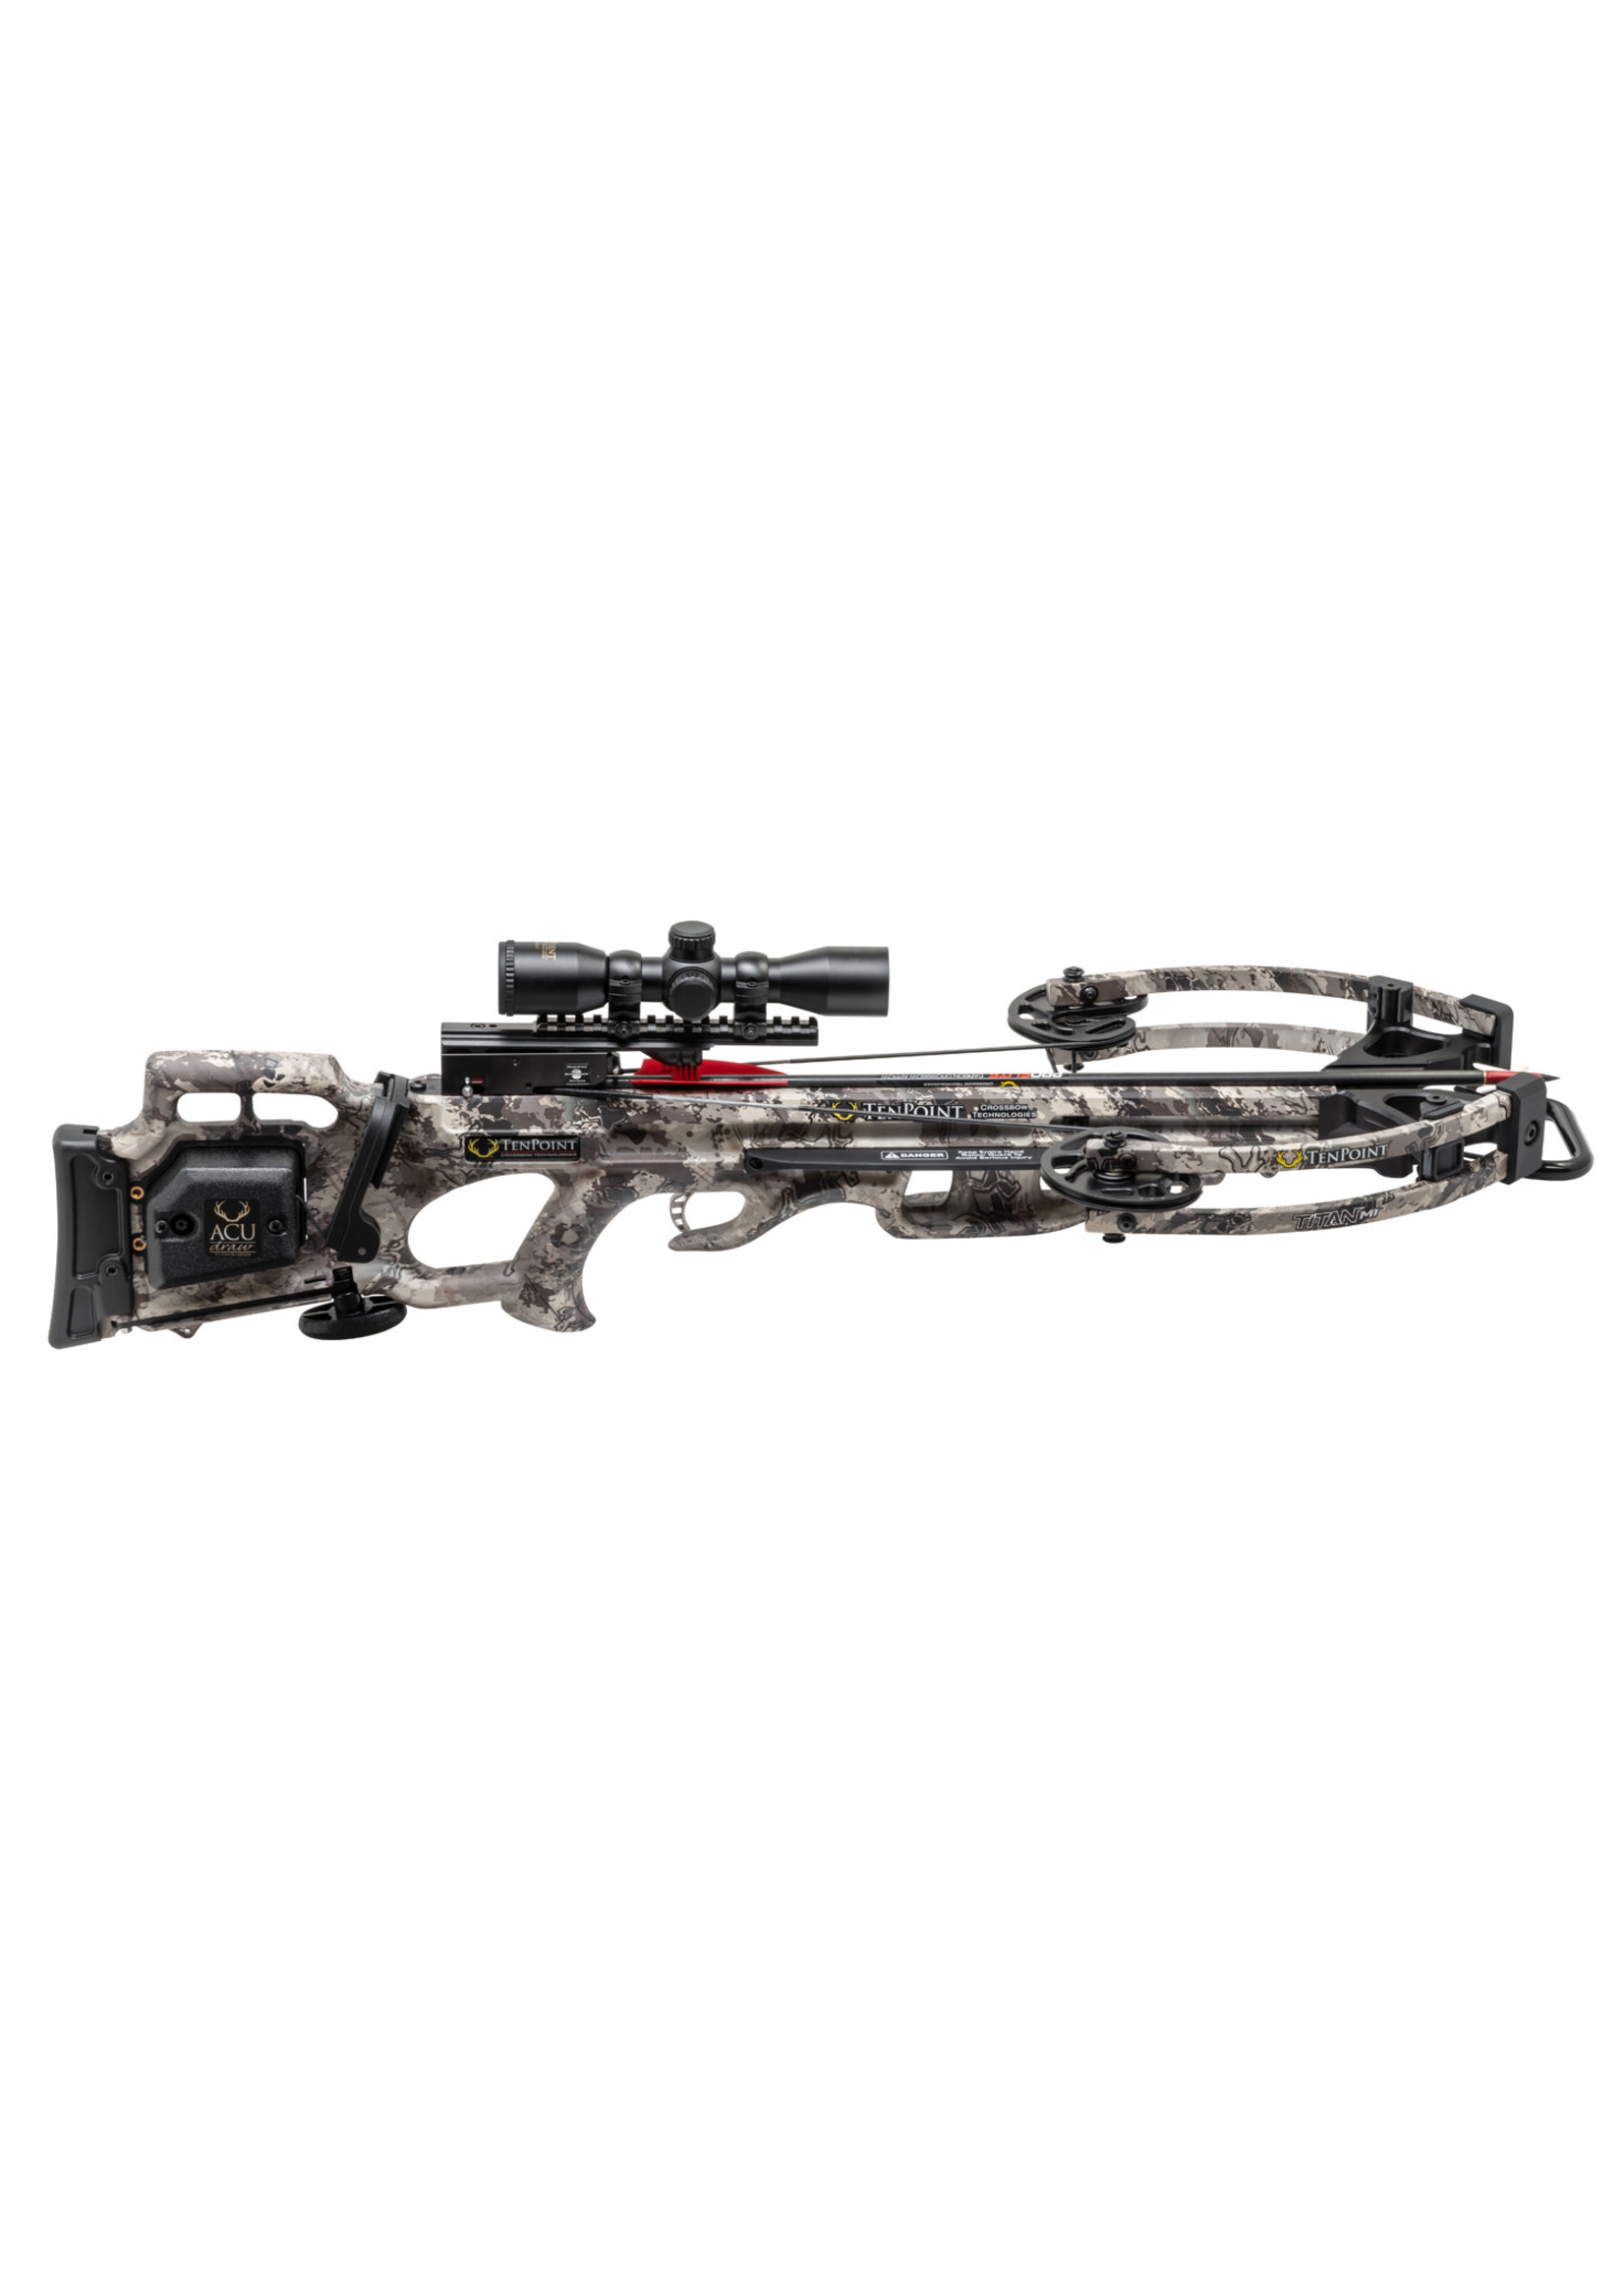 Tenpoint Titan m1 crossbow rope sled